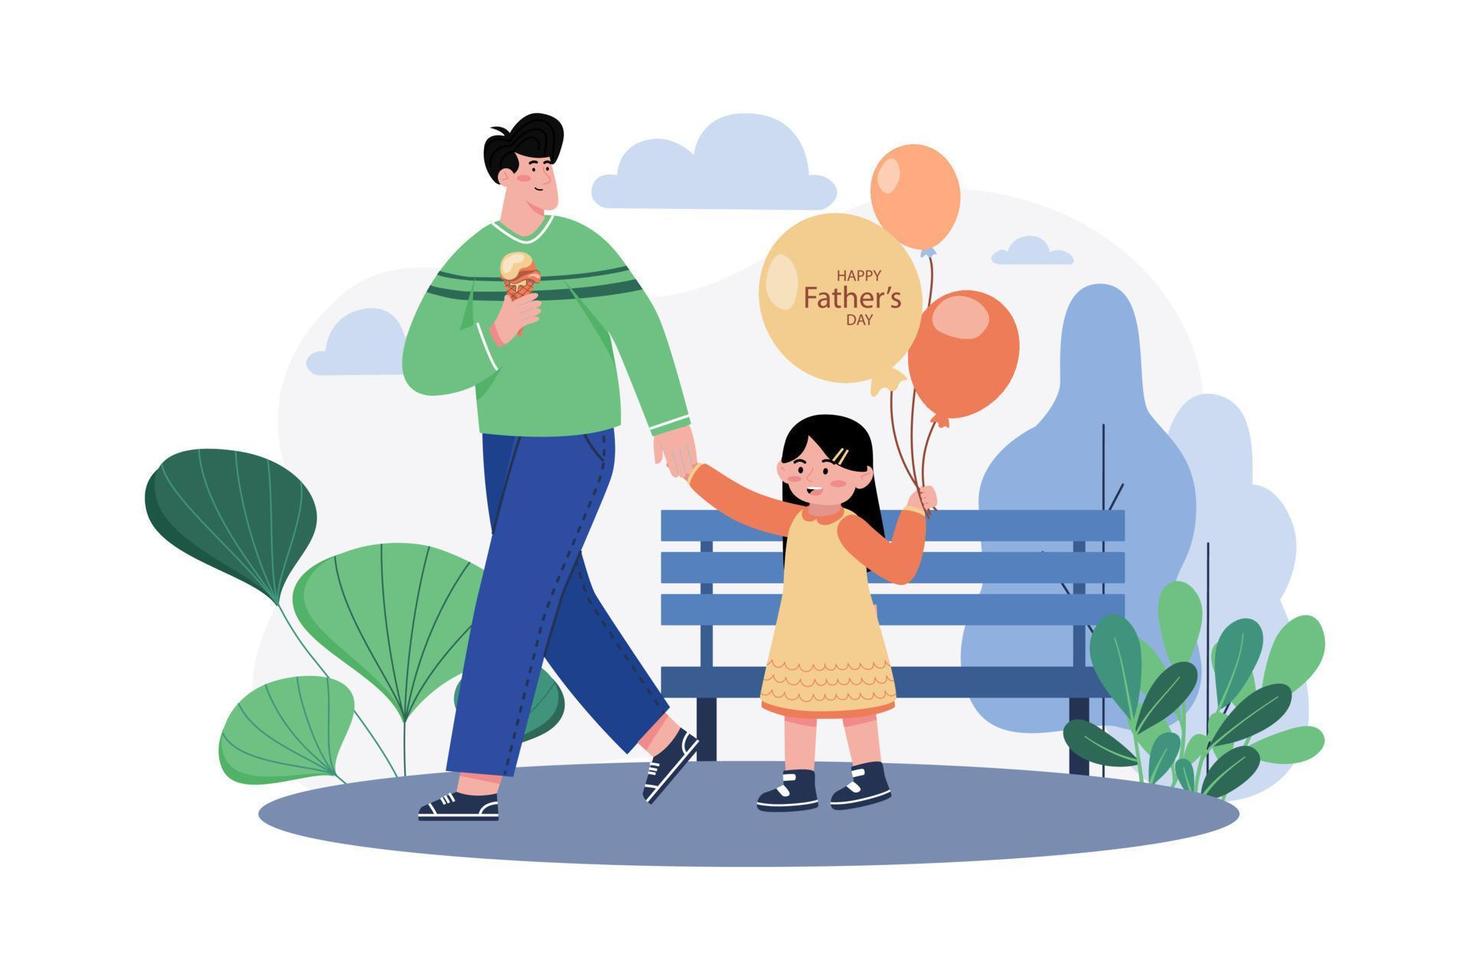 Dad Celebrates Father's Day By Taking His Kids For A Walk vector